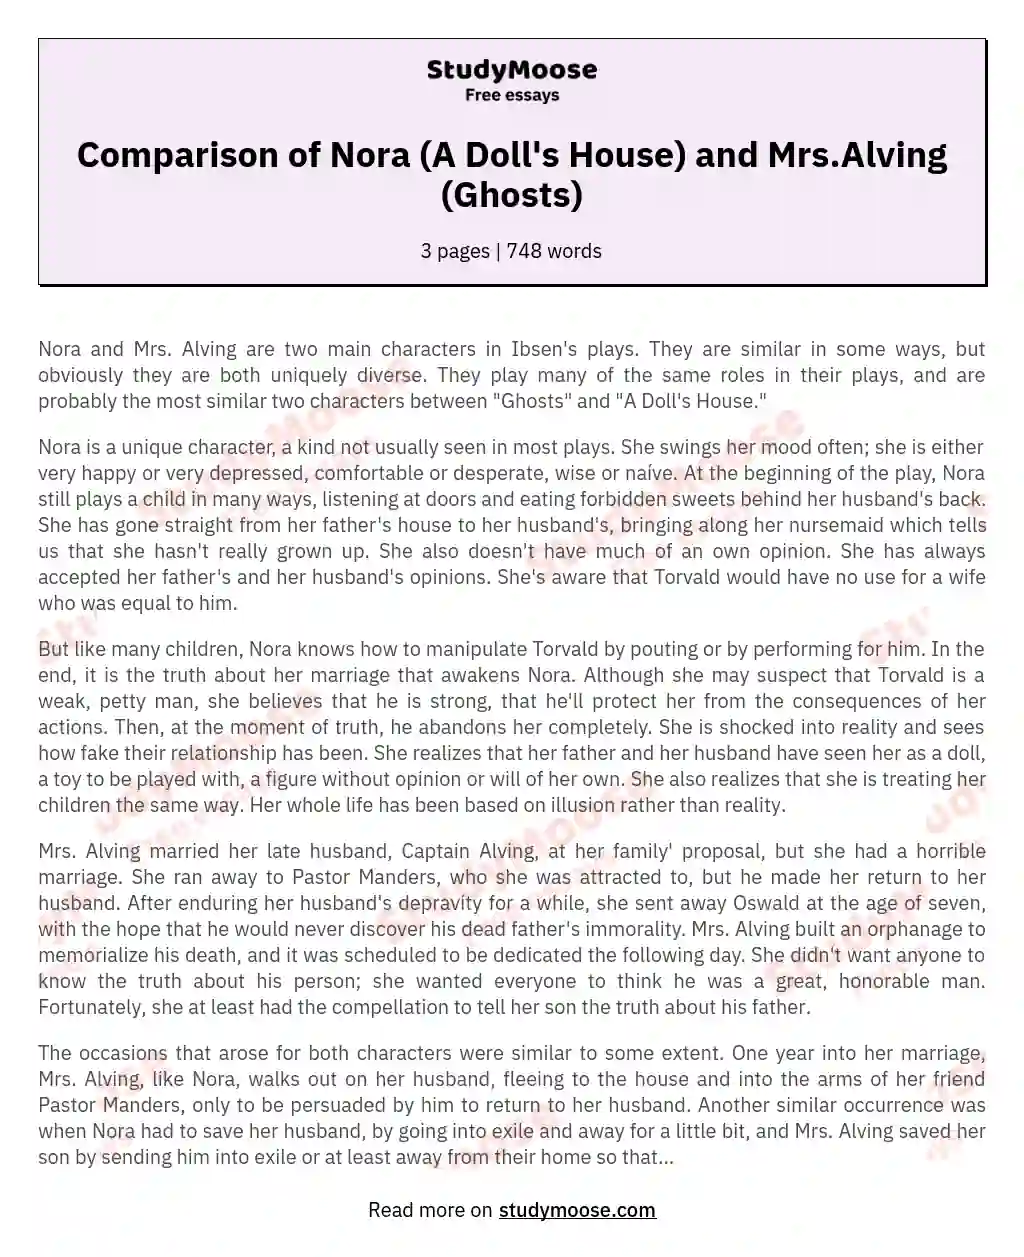 Comparison of Nora (A Doll's House) and Mrs.Alving (Ghosts)